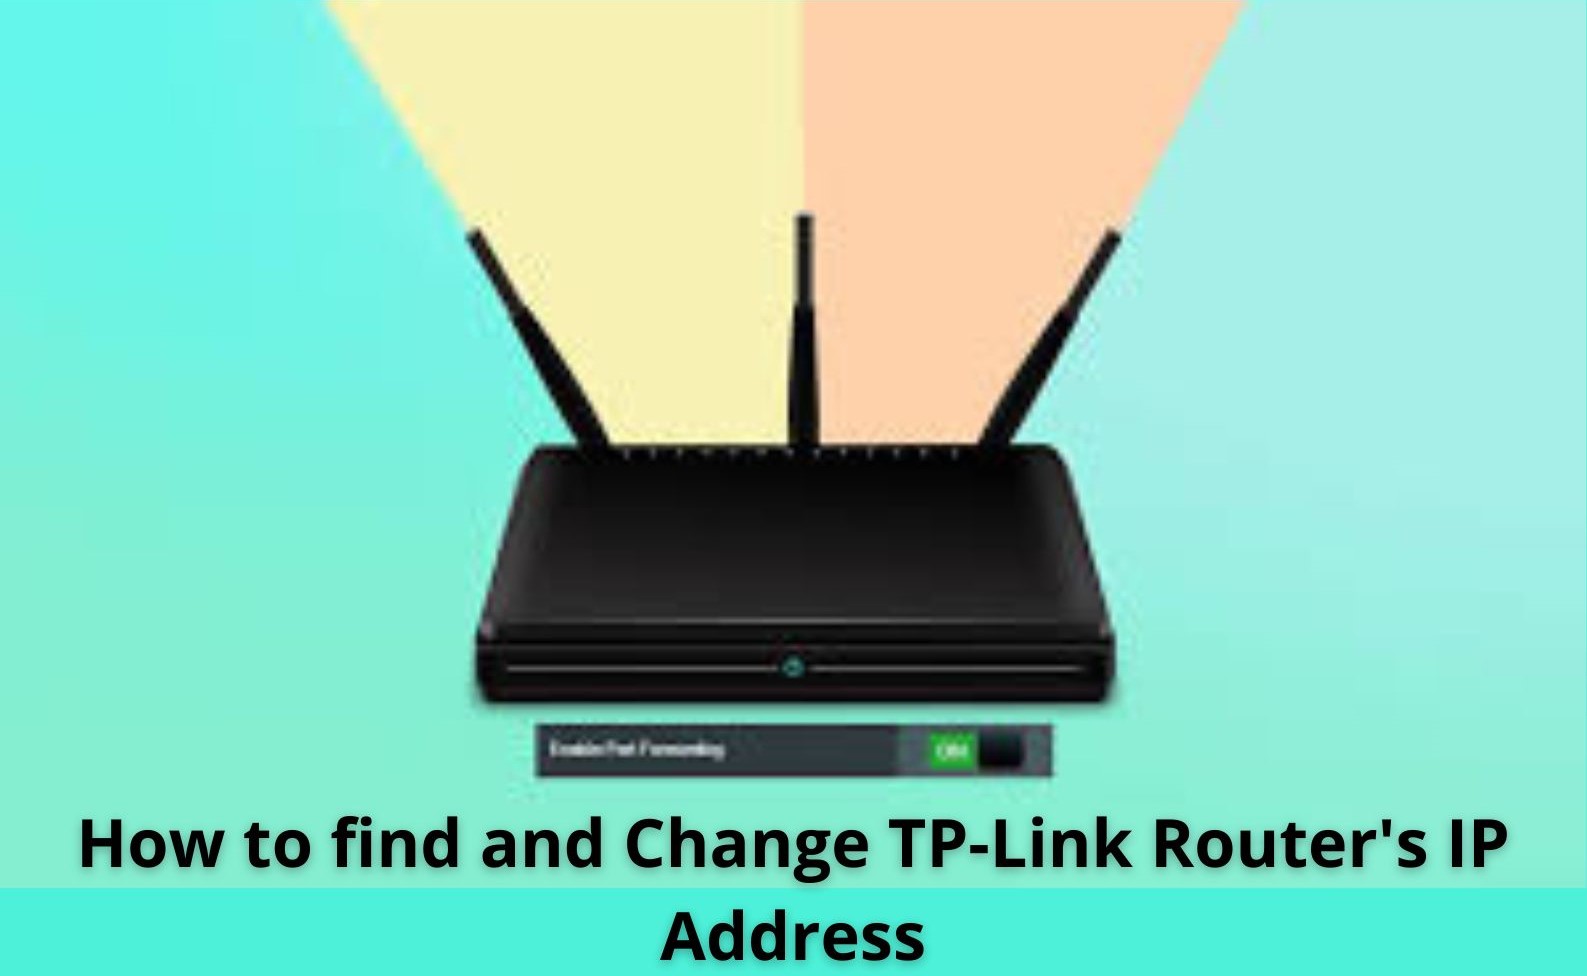 How to find and Change TP-Link Router's IP Address